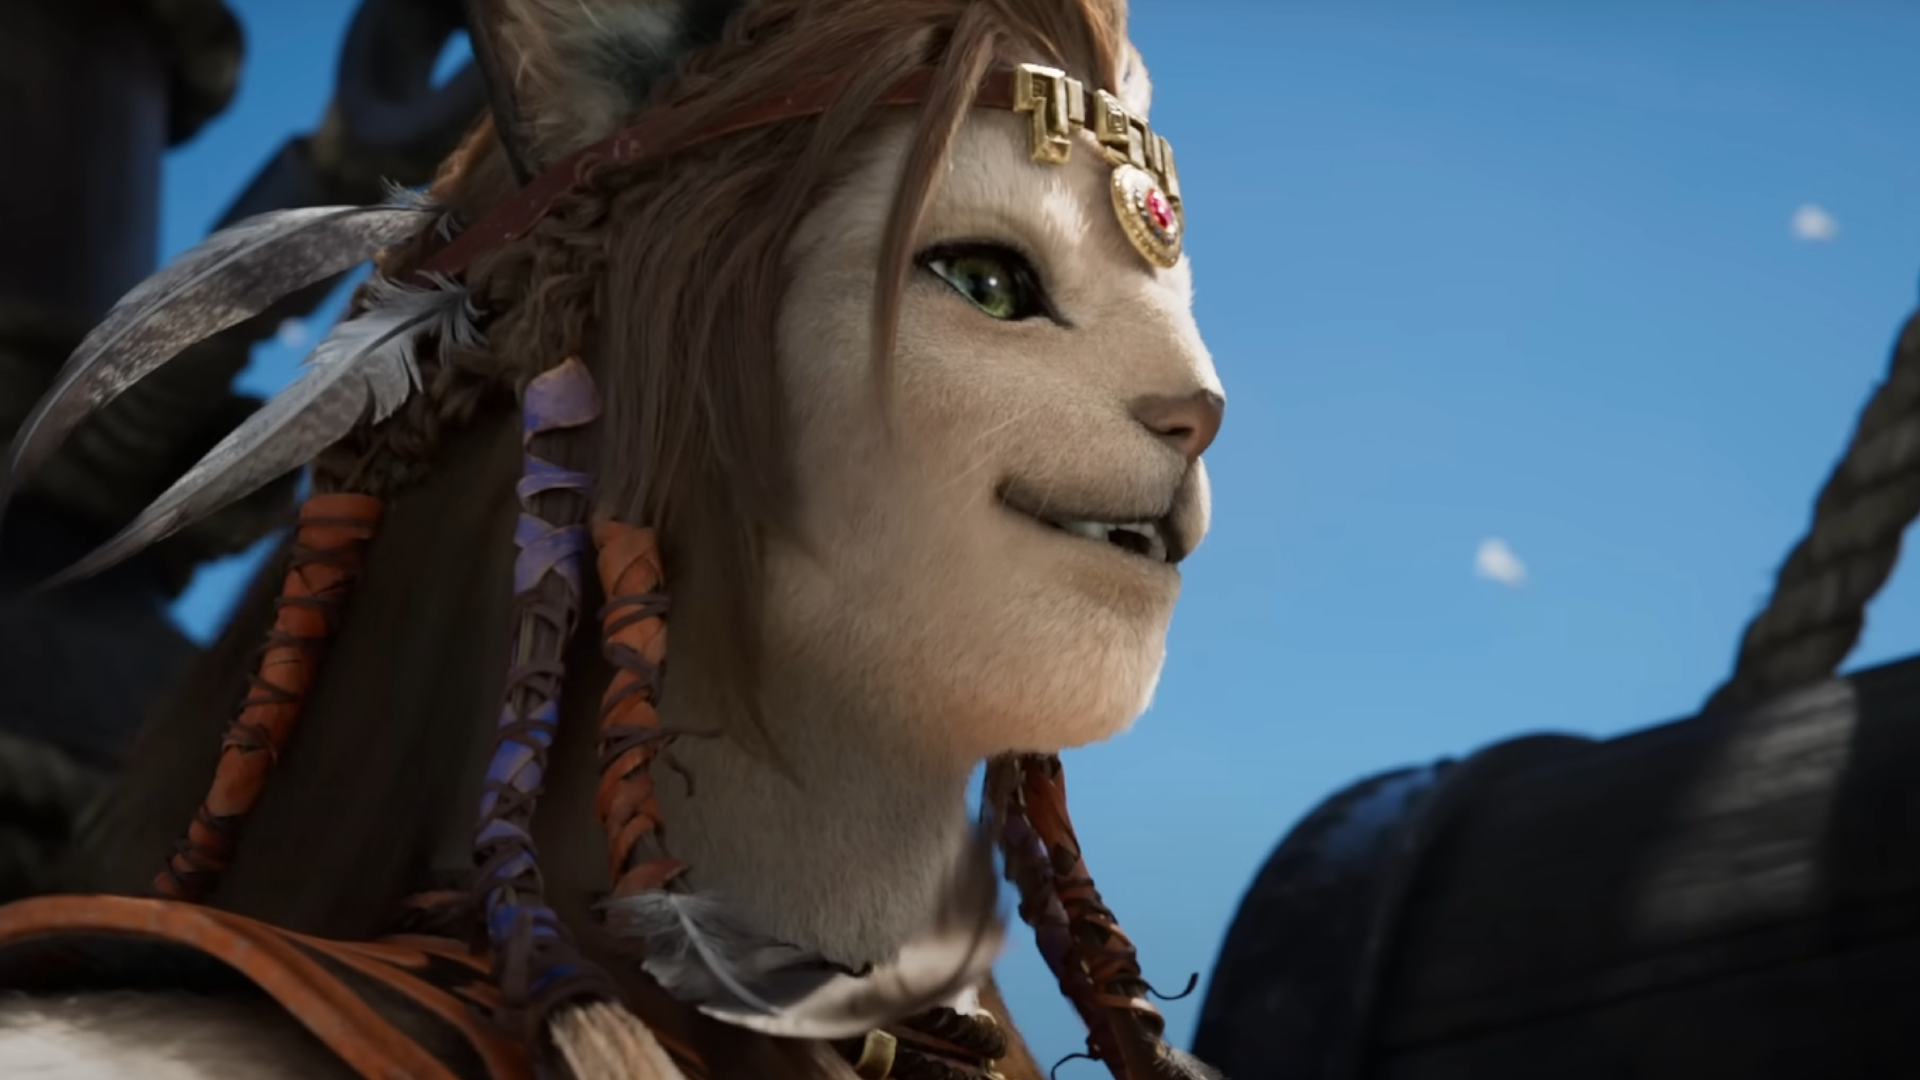 An image of the first Hrothgar in Final Fantasy 14 smiling as she regards her home, Tural, in Dawntrail. She is a large lioness-like lady with a bright, optimistic expression: sailing under a clear blue sky.